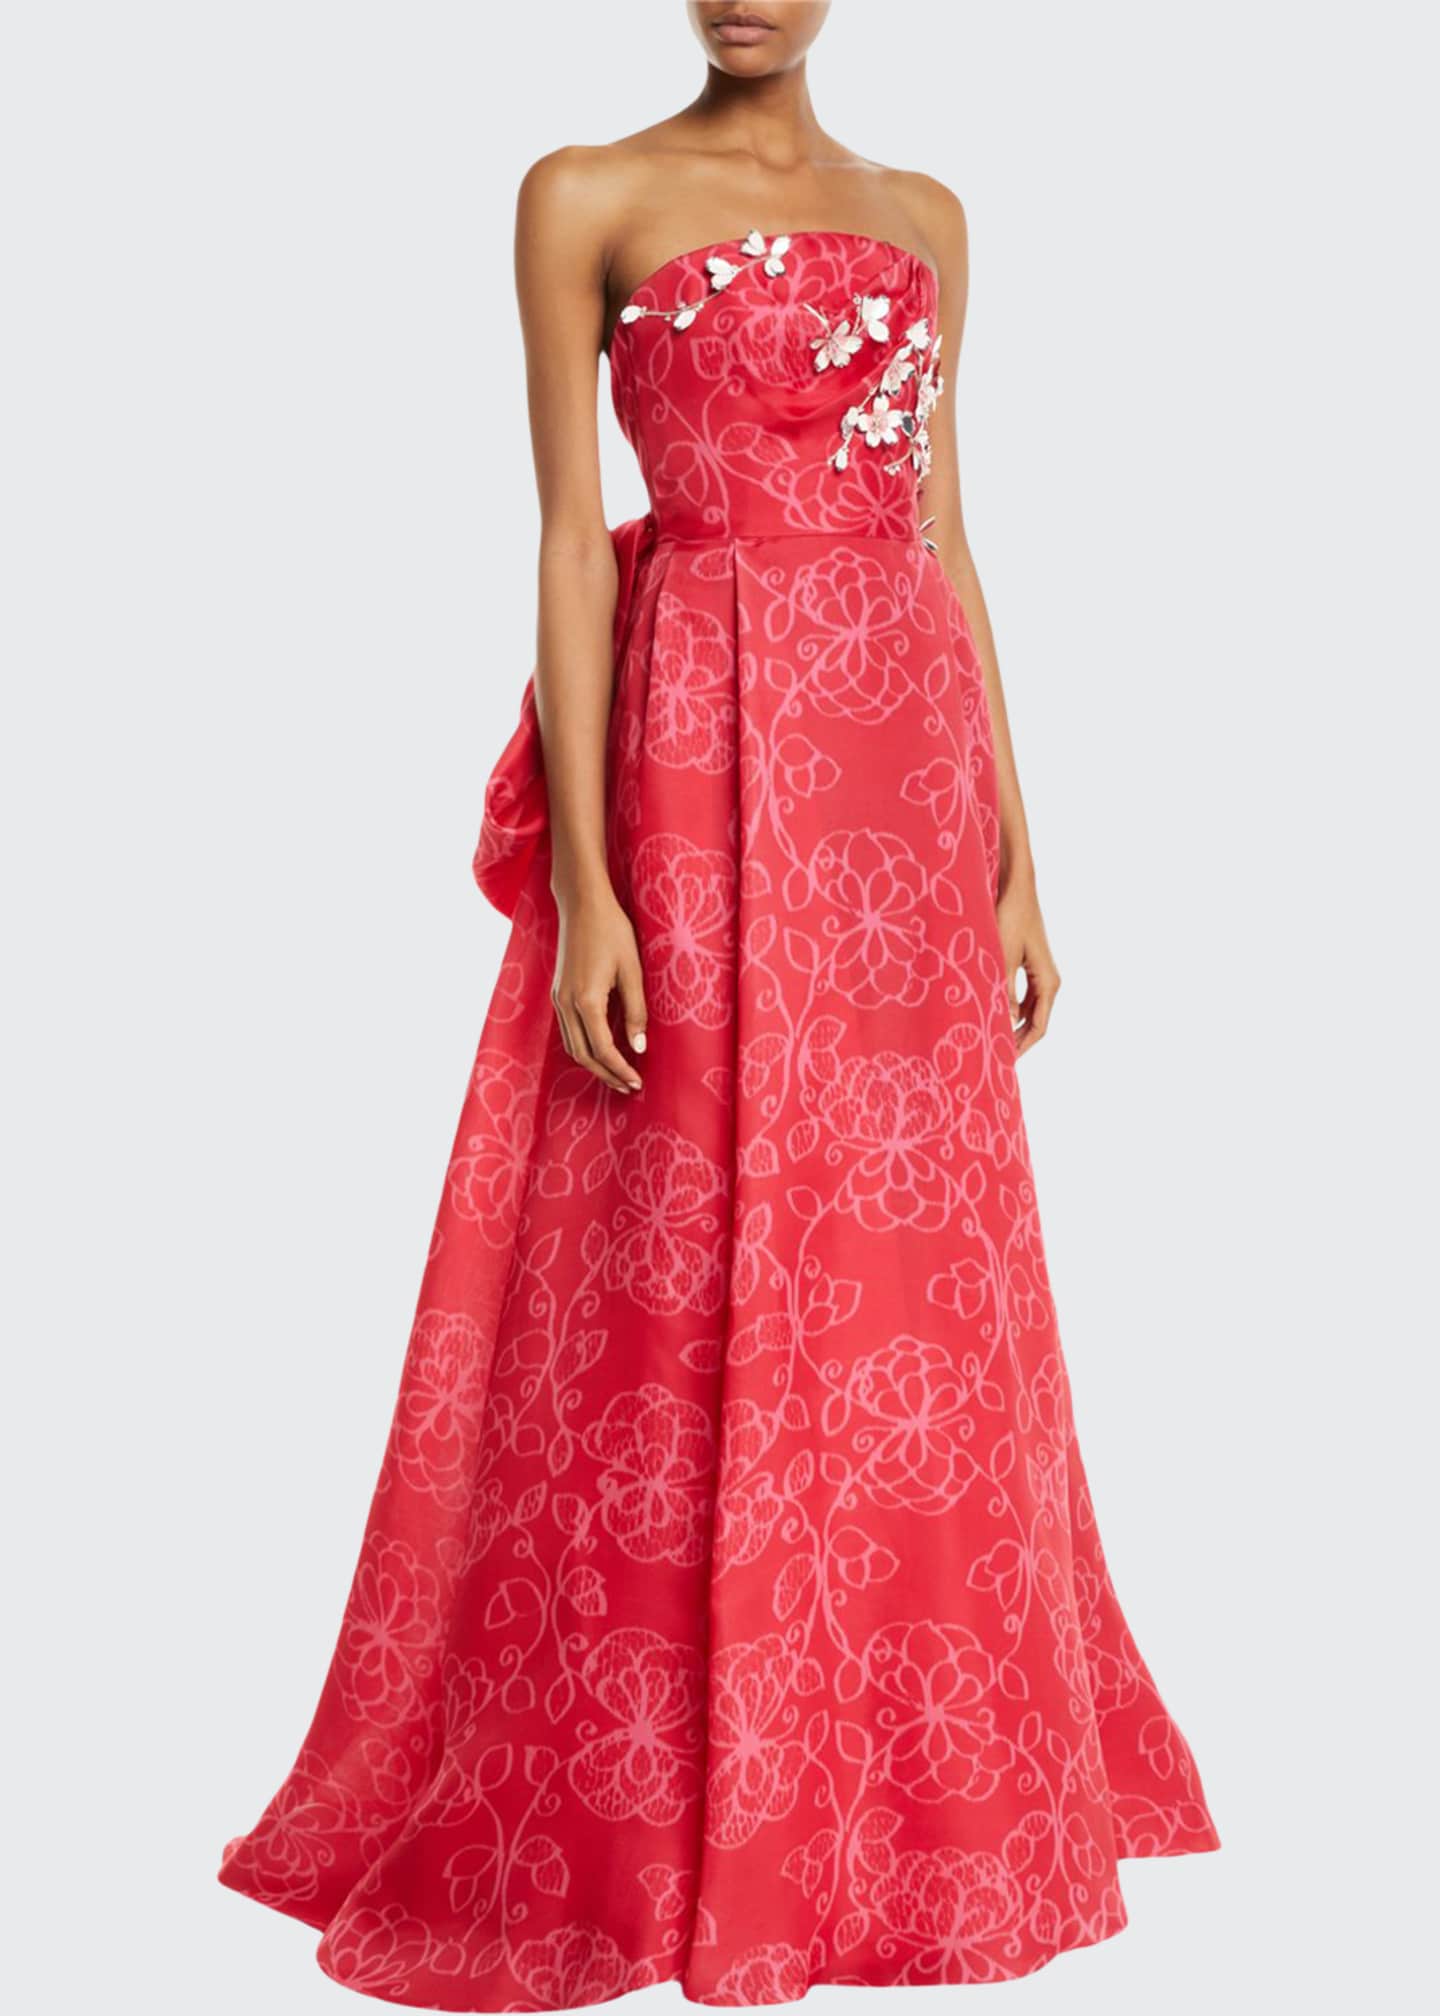 Carolina Herrera Strapless Floral-Embroidered Tie-Back Gown - Bergdorf ...